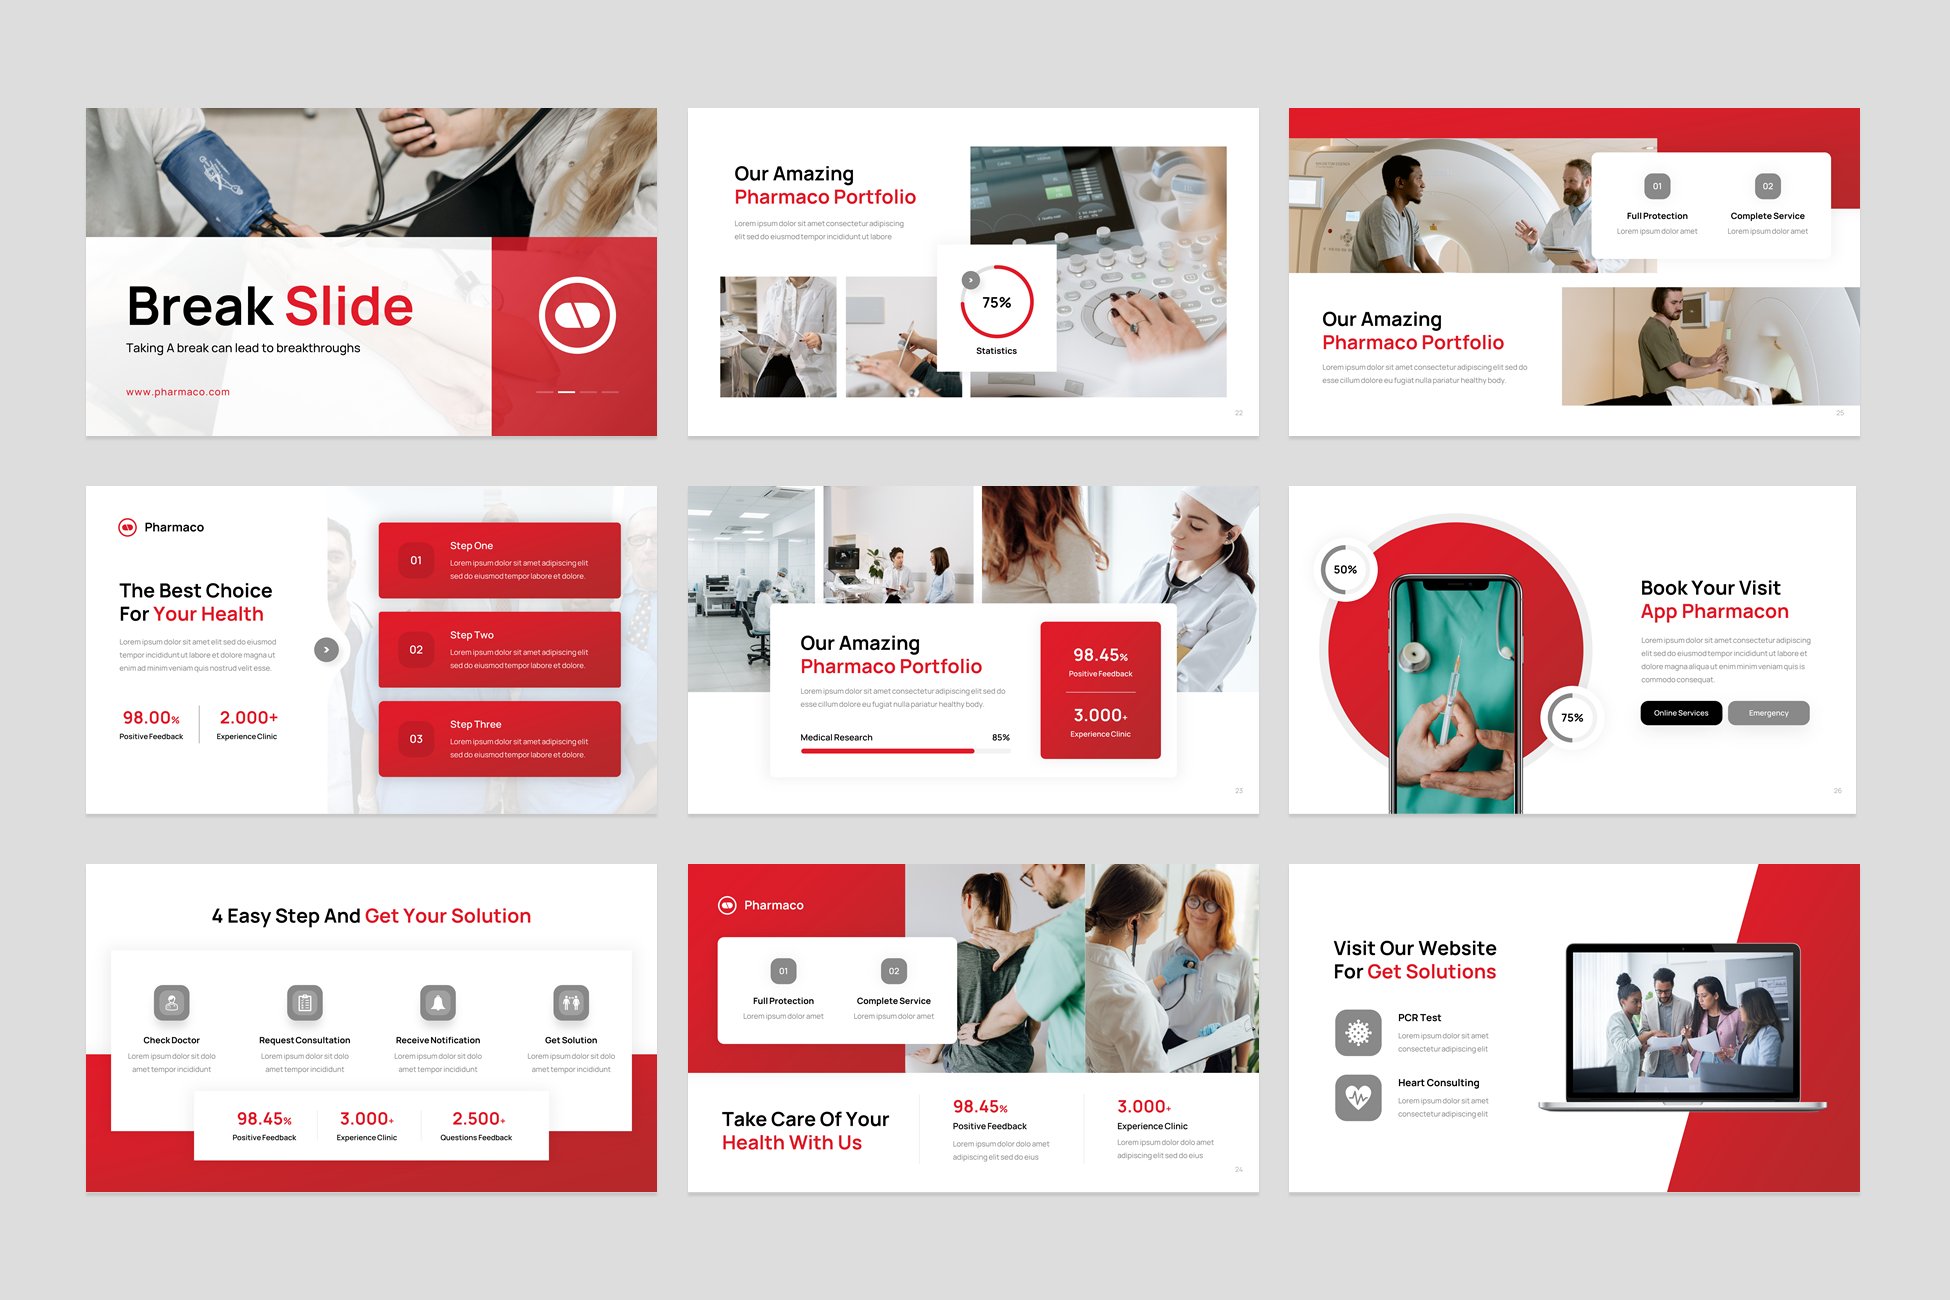 Big and creative template with red sections.